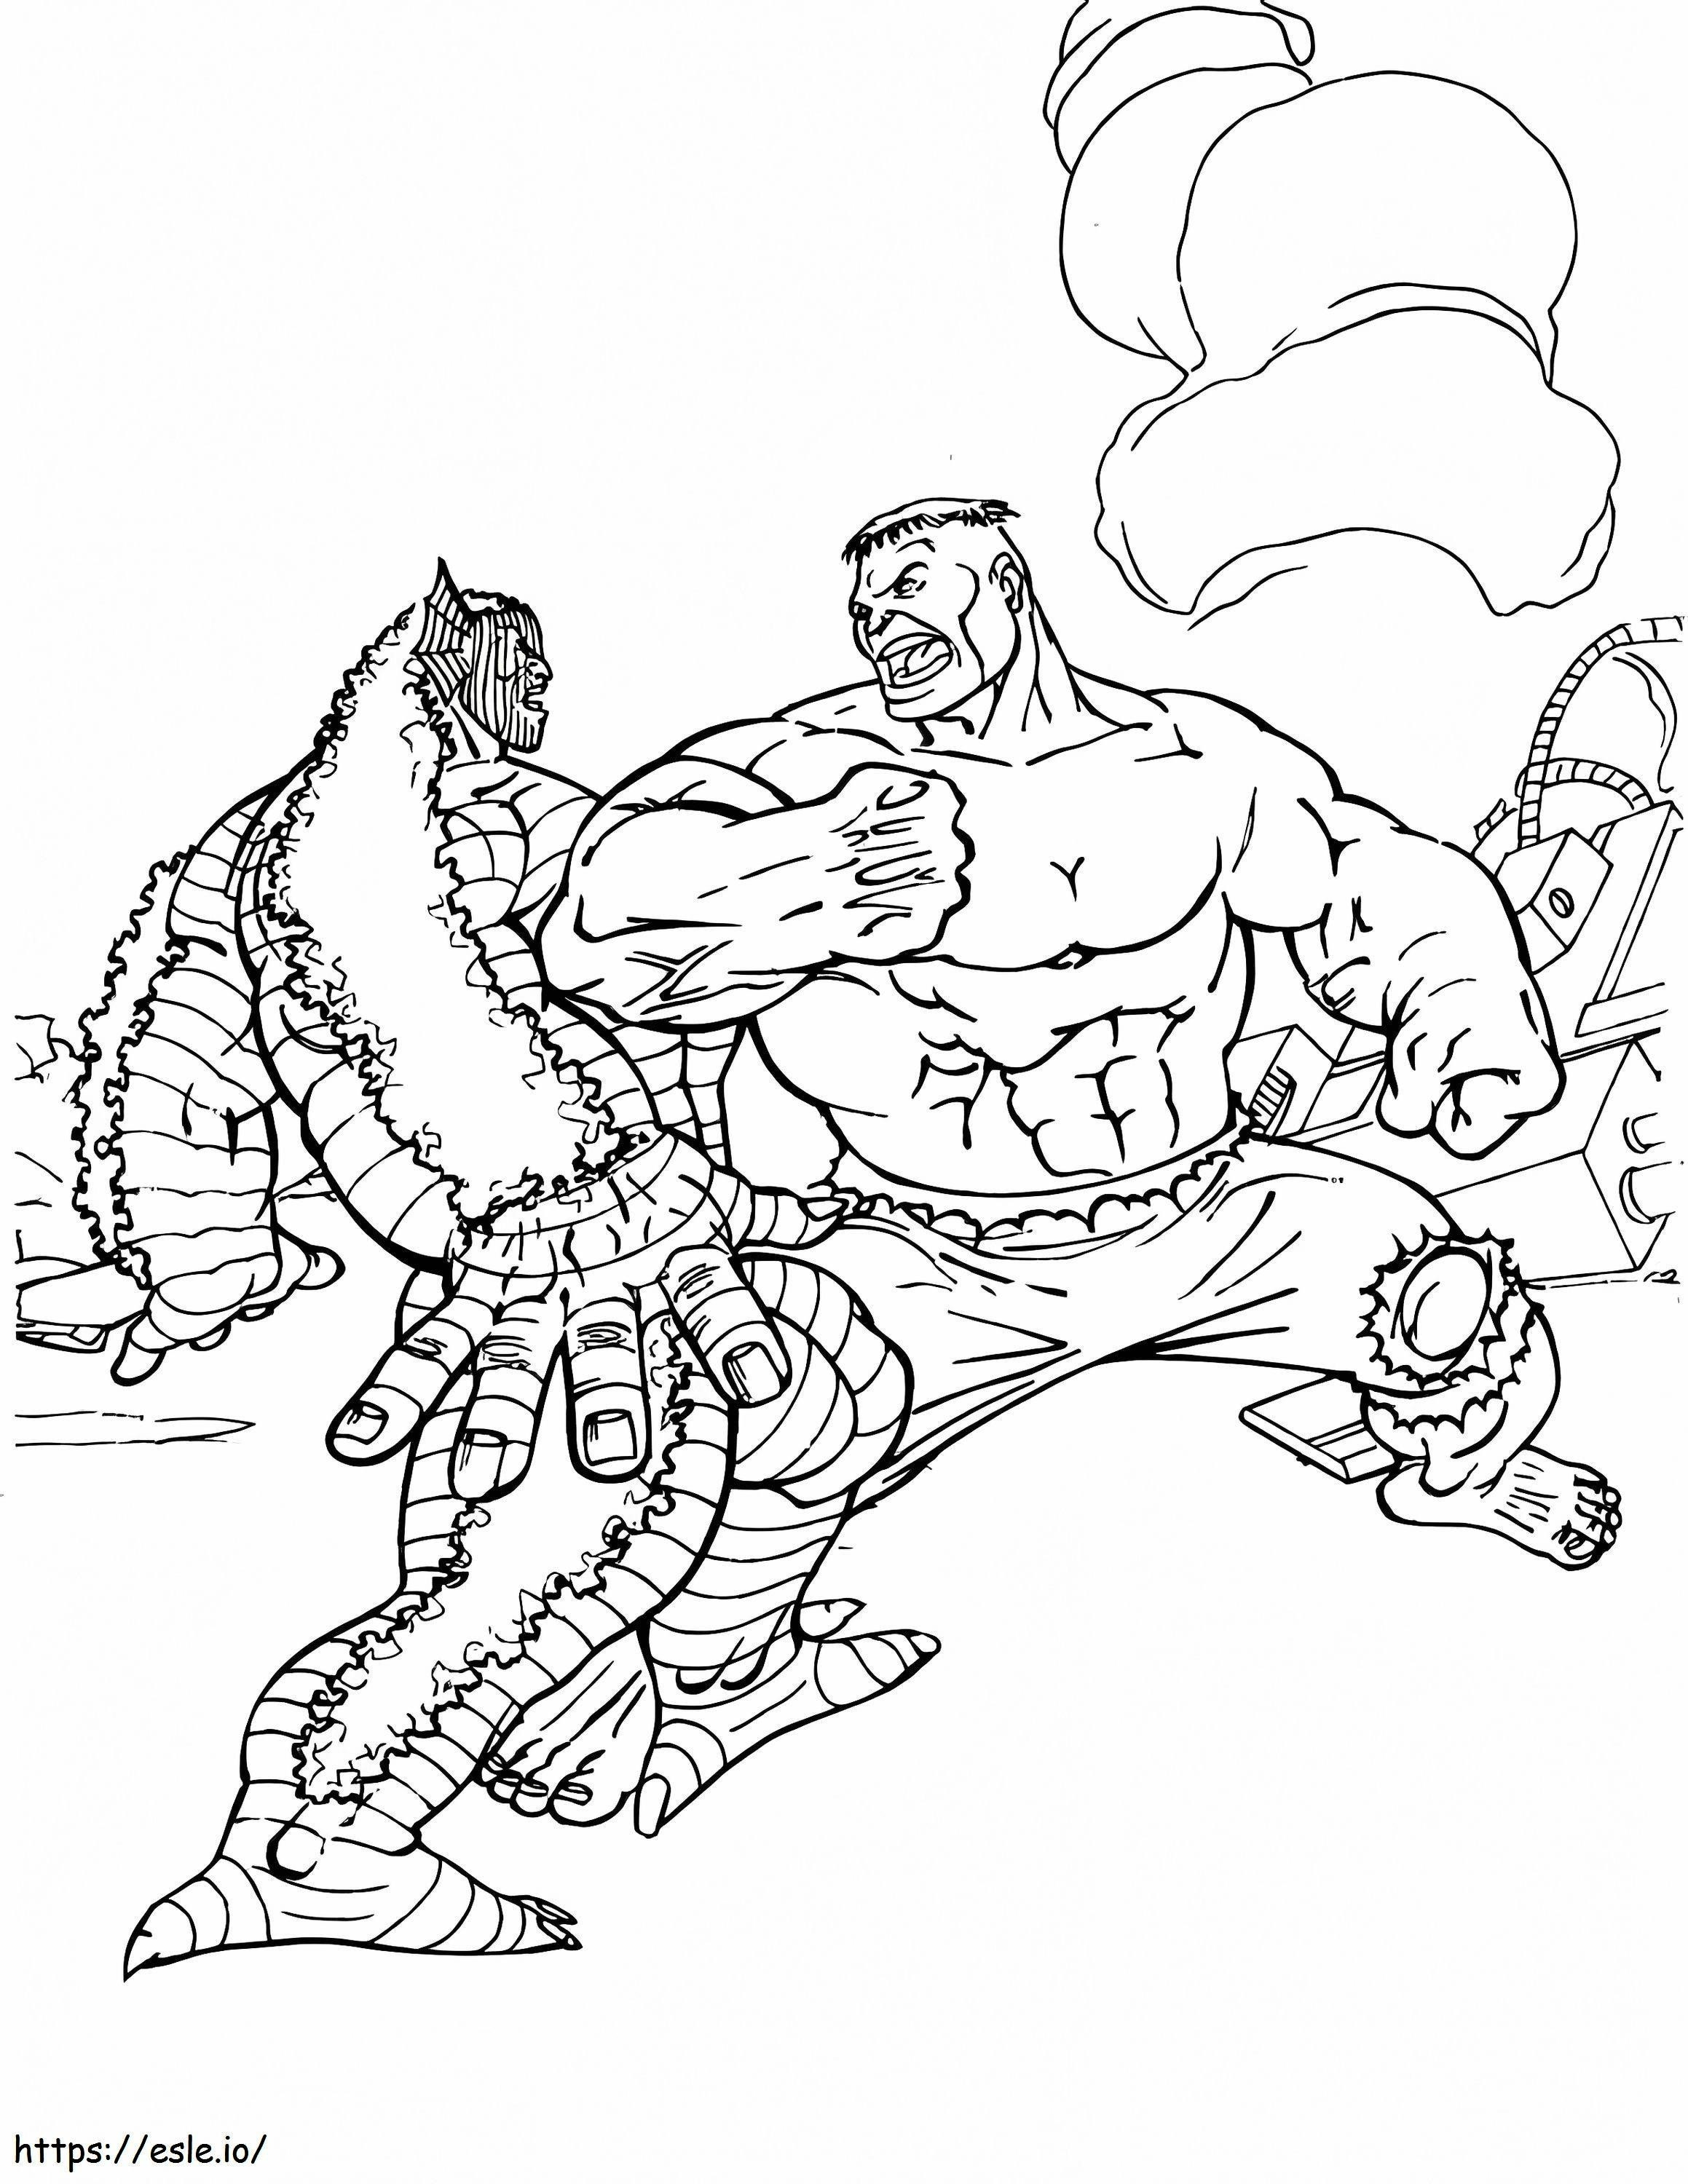 Hulk And Abomination coloring page